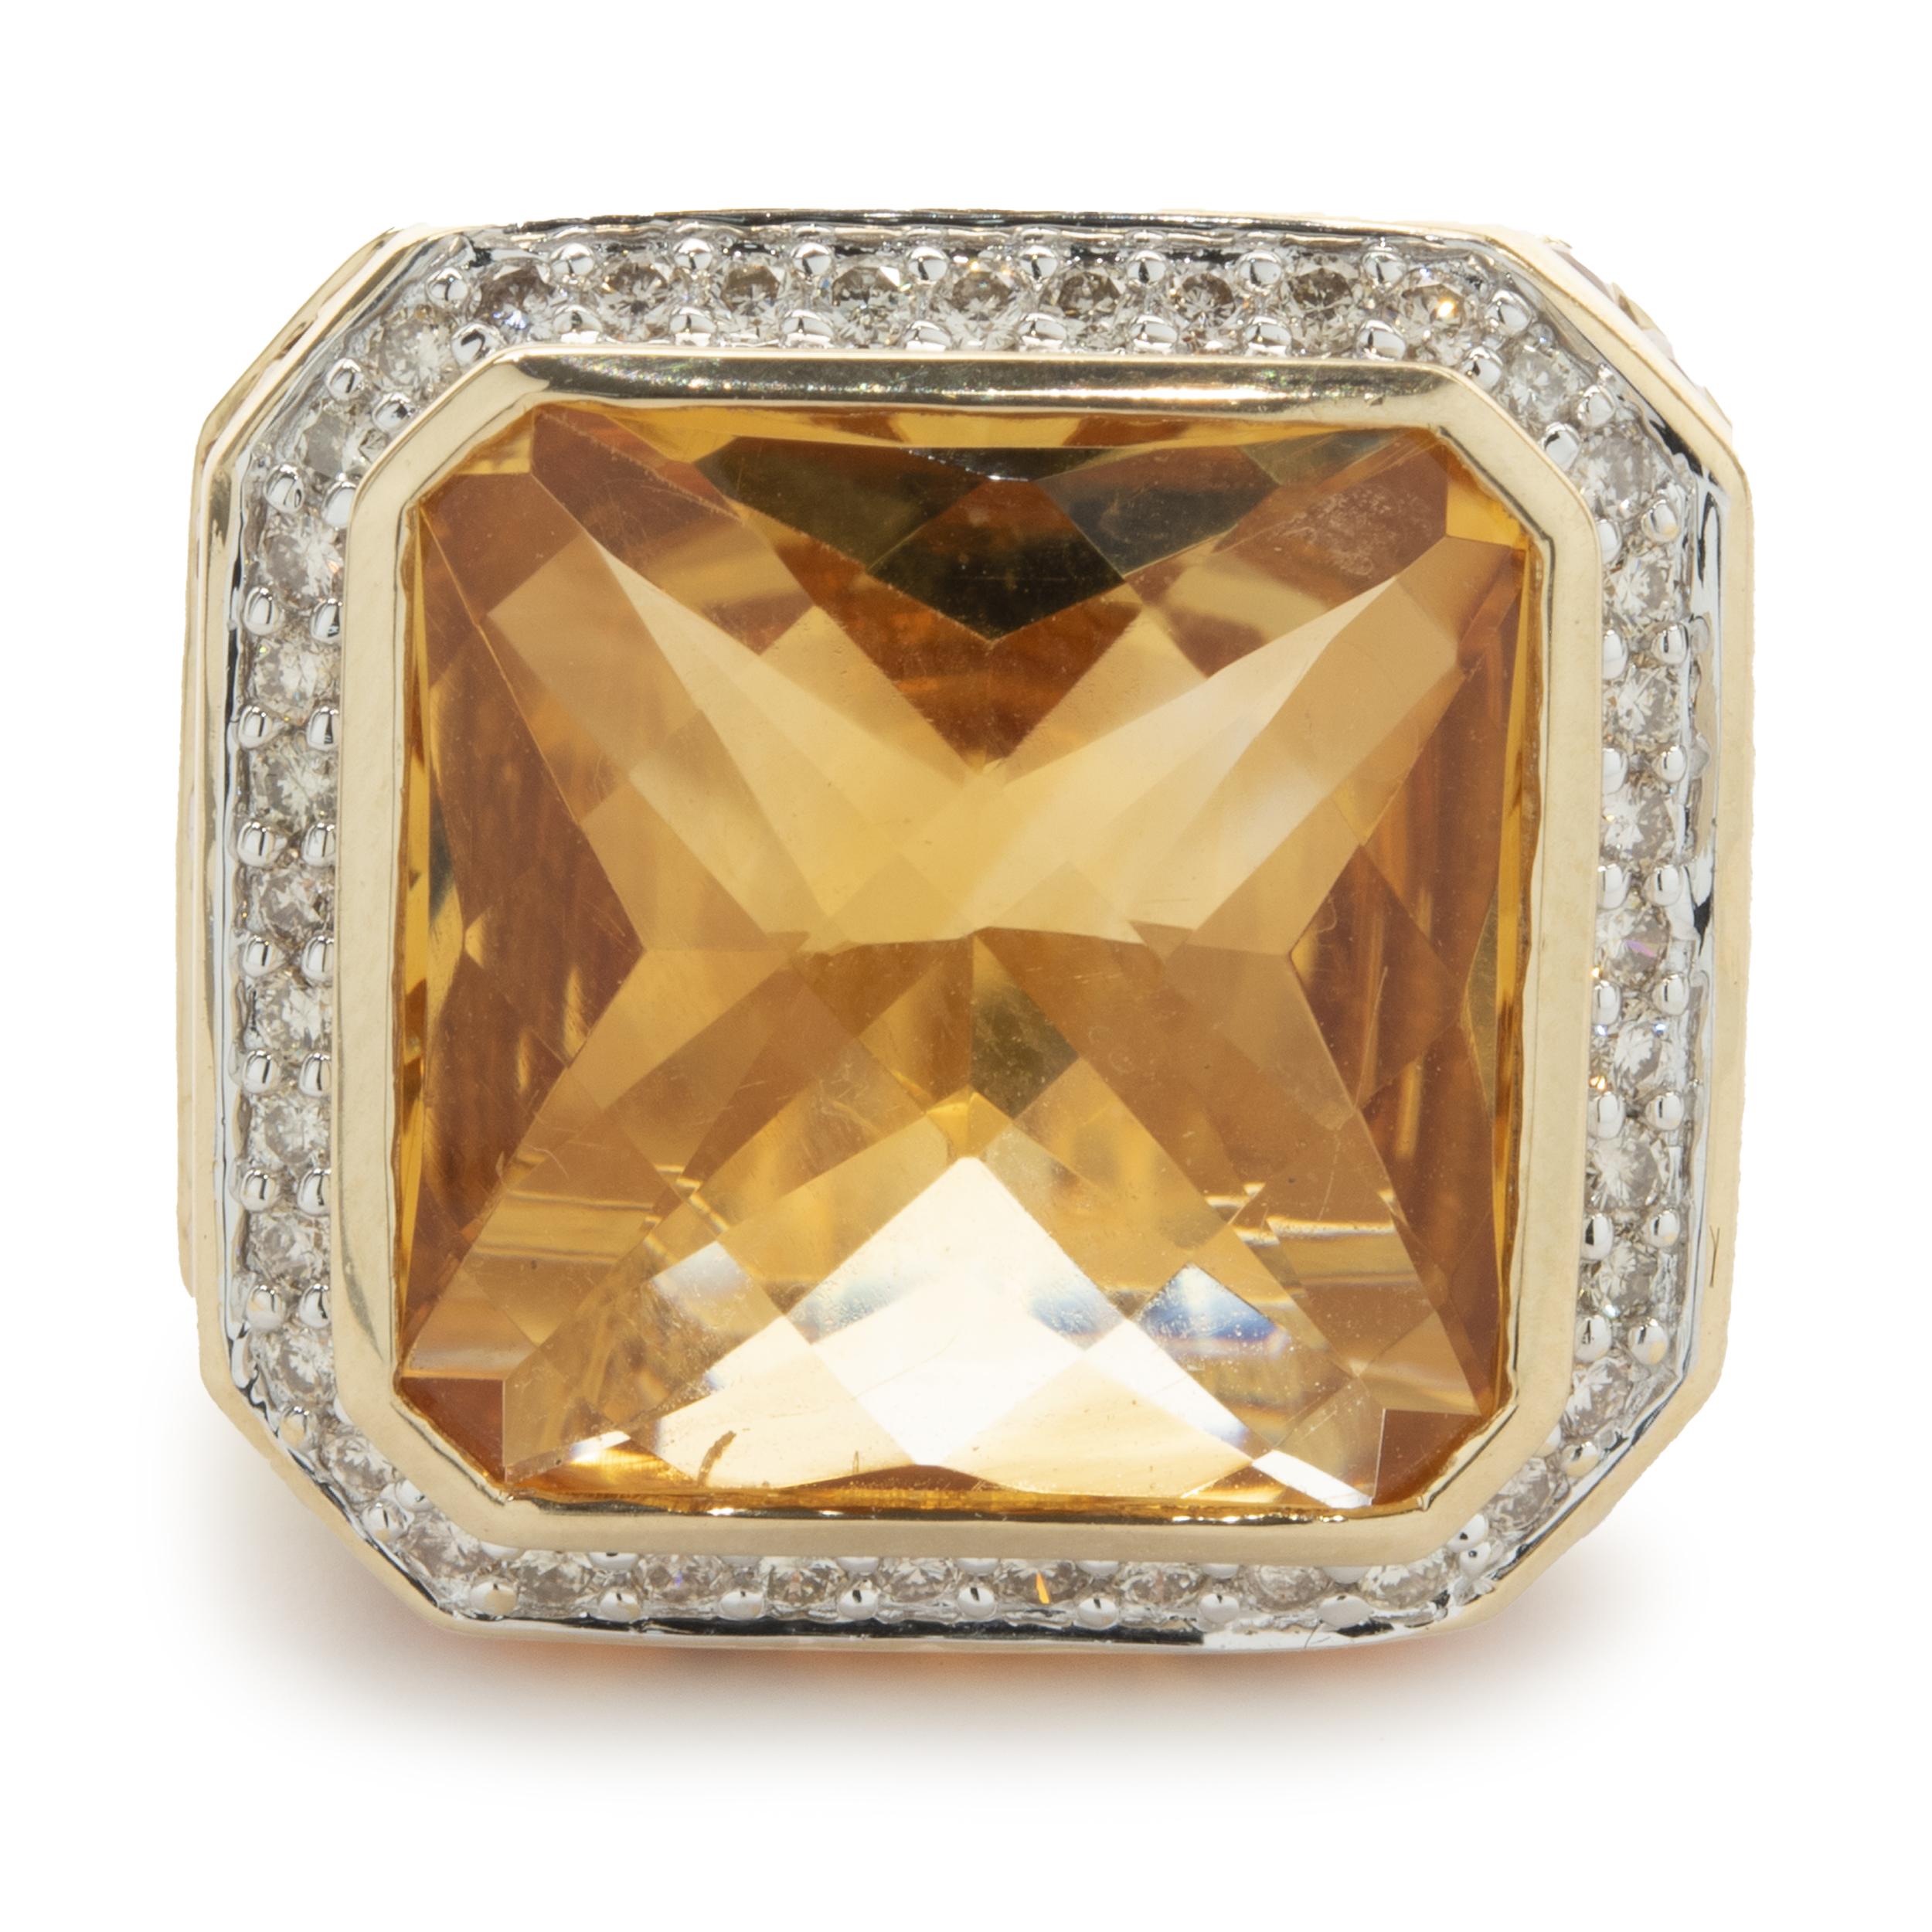 Designer: BJC
Material: 14K yellow gold
Diamond: 38 round brilliant cut = 0.38cttw
Color: G
Clarity: SI1
Dimensions: ring top measures 20.23mm
Ring Size: 6.5 (complimentary sizing available)
Weight: 18.40 grams